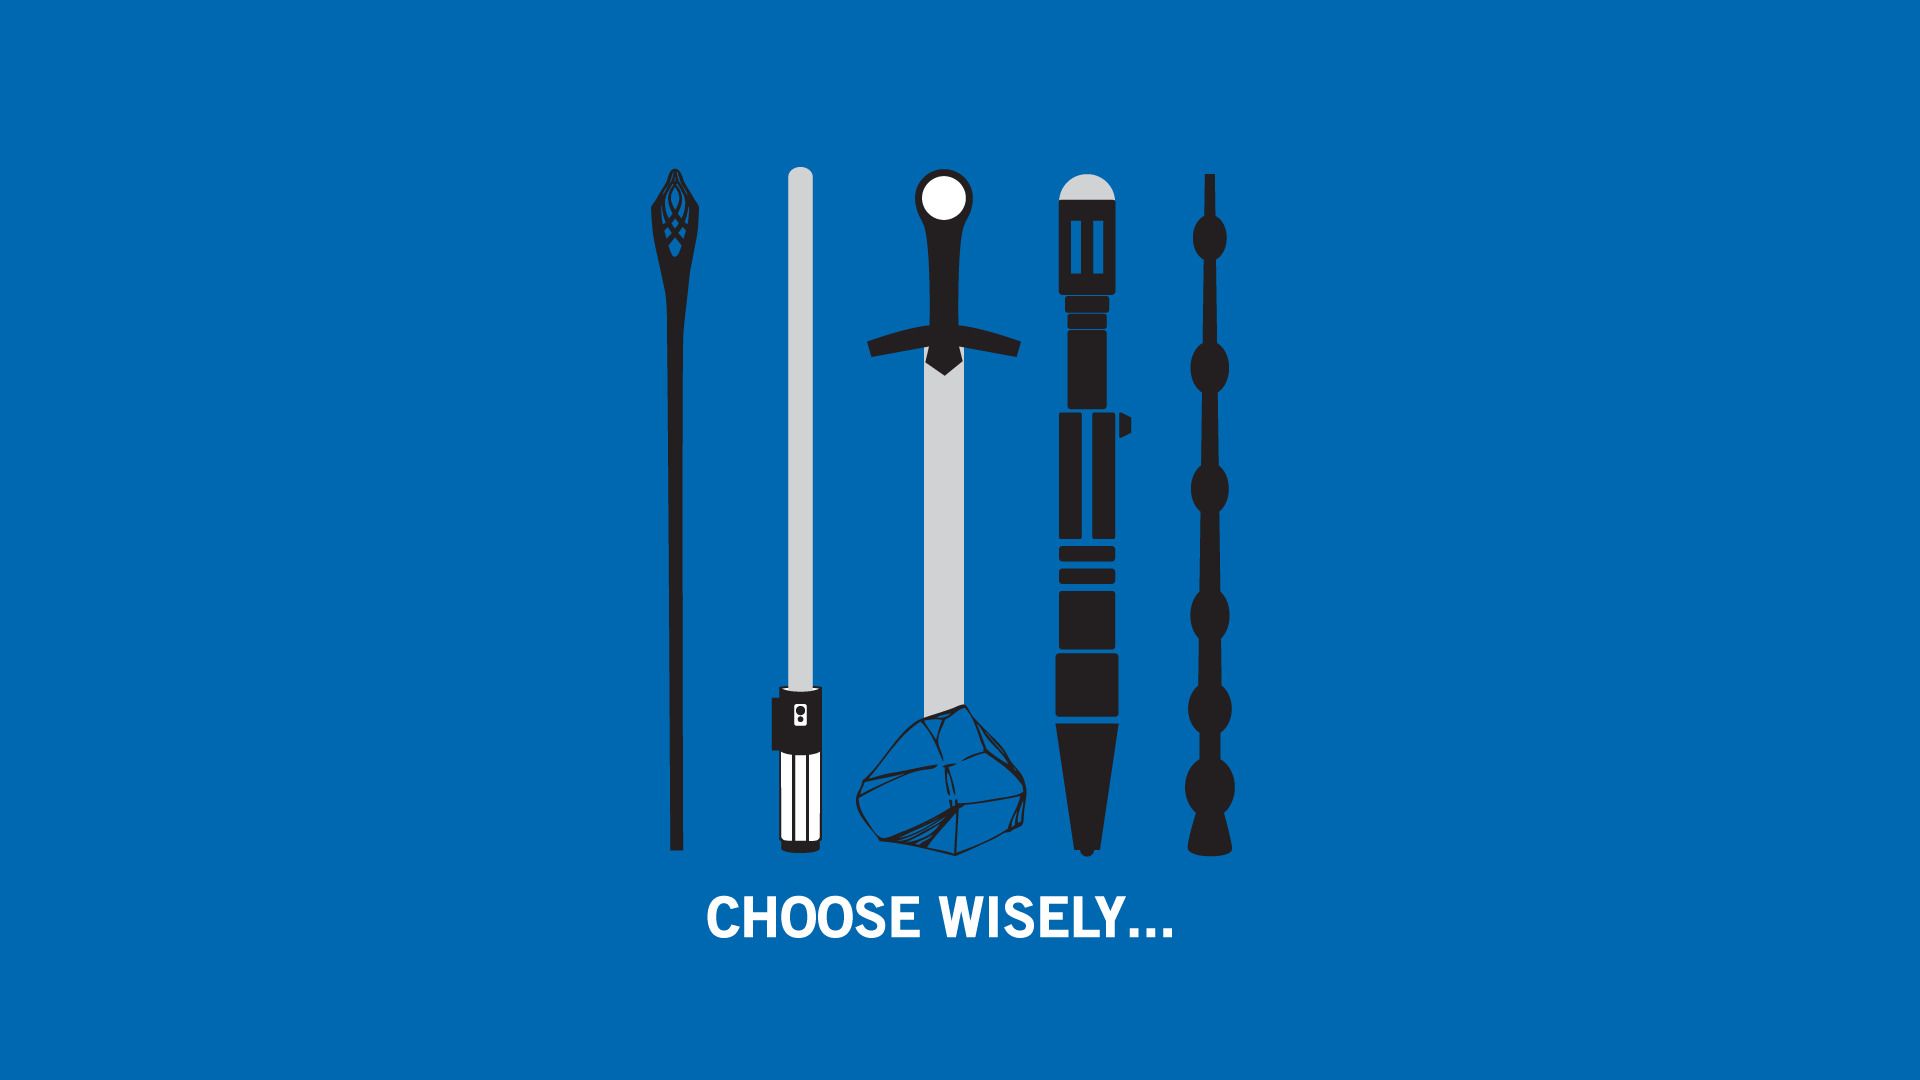 The Lord Of The Rings, Star Wars, Excalibur, Harry Potter, Doctor Who, Weapon, Minimalism, Blue Background, Humor Wallpaper HD / Desktop and Mobile Background